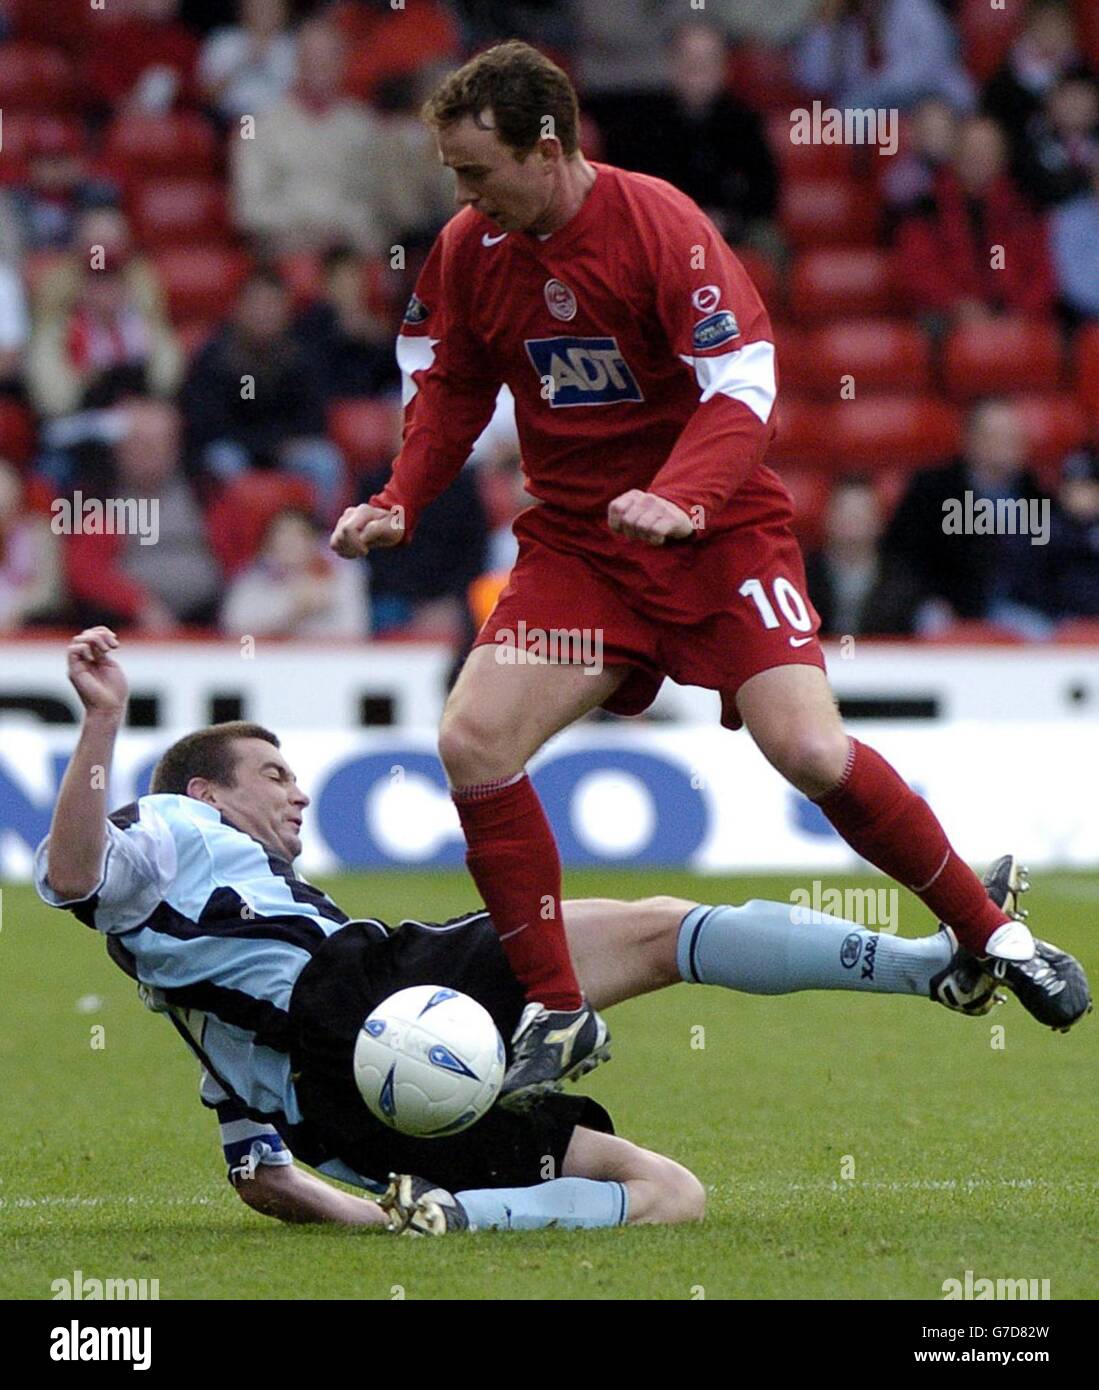 Aberdeen's Derek Adams challenges Dundee's Barry Smith during their Bank of Scotland Scottish Premier League match at Pittodrie Stadium, Aberdeen, Saturday October 2, 2004. EDITORIAL USE ONLY. Stock Photo